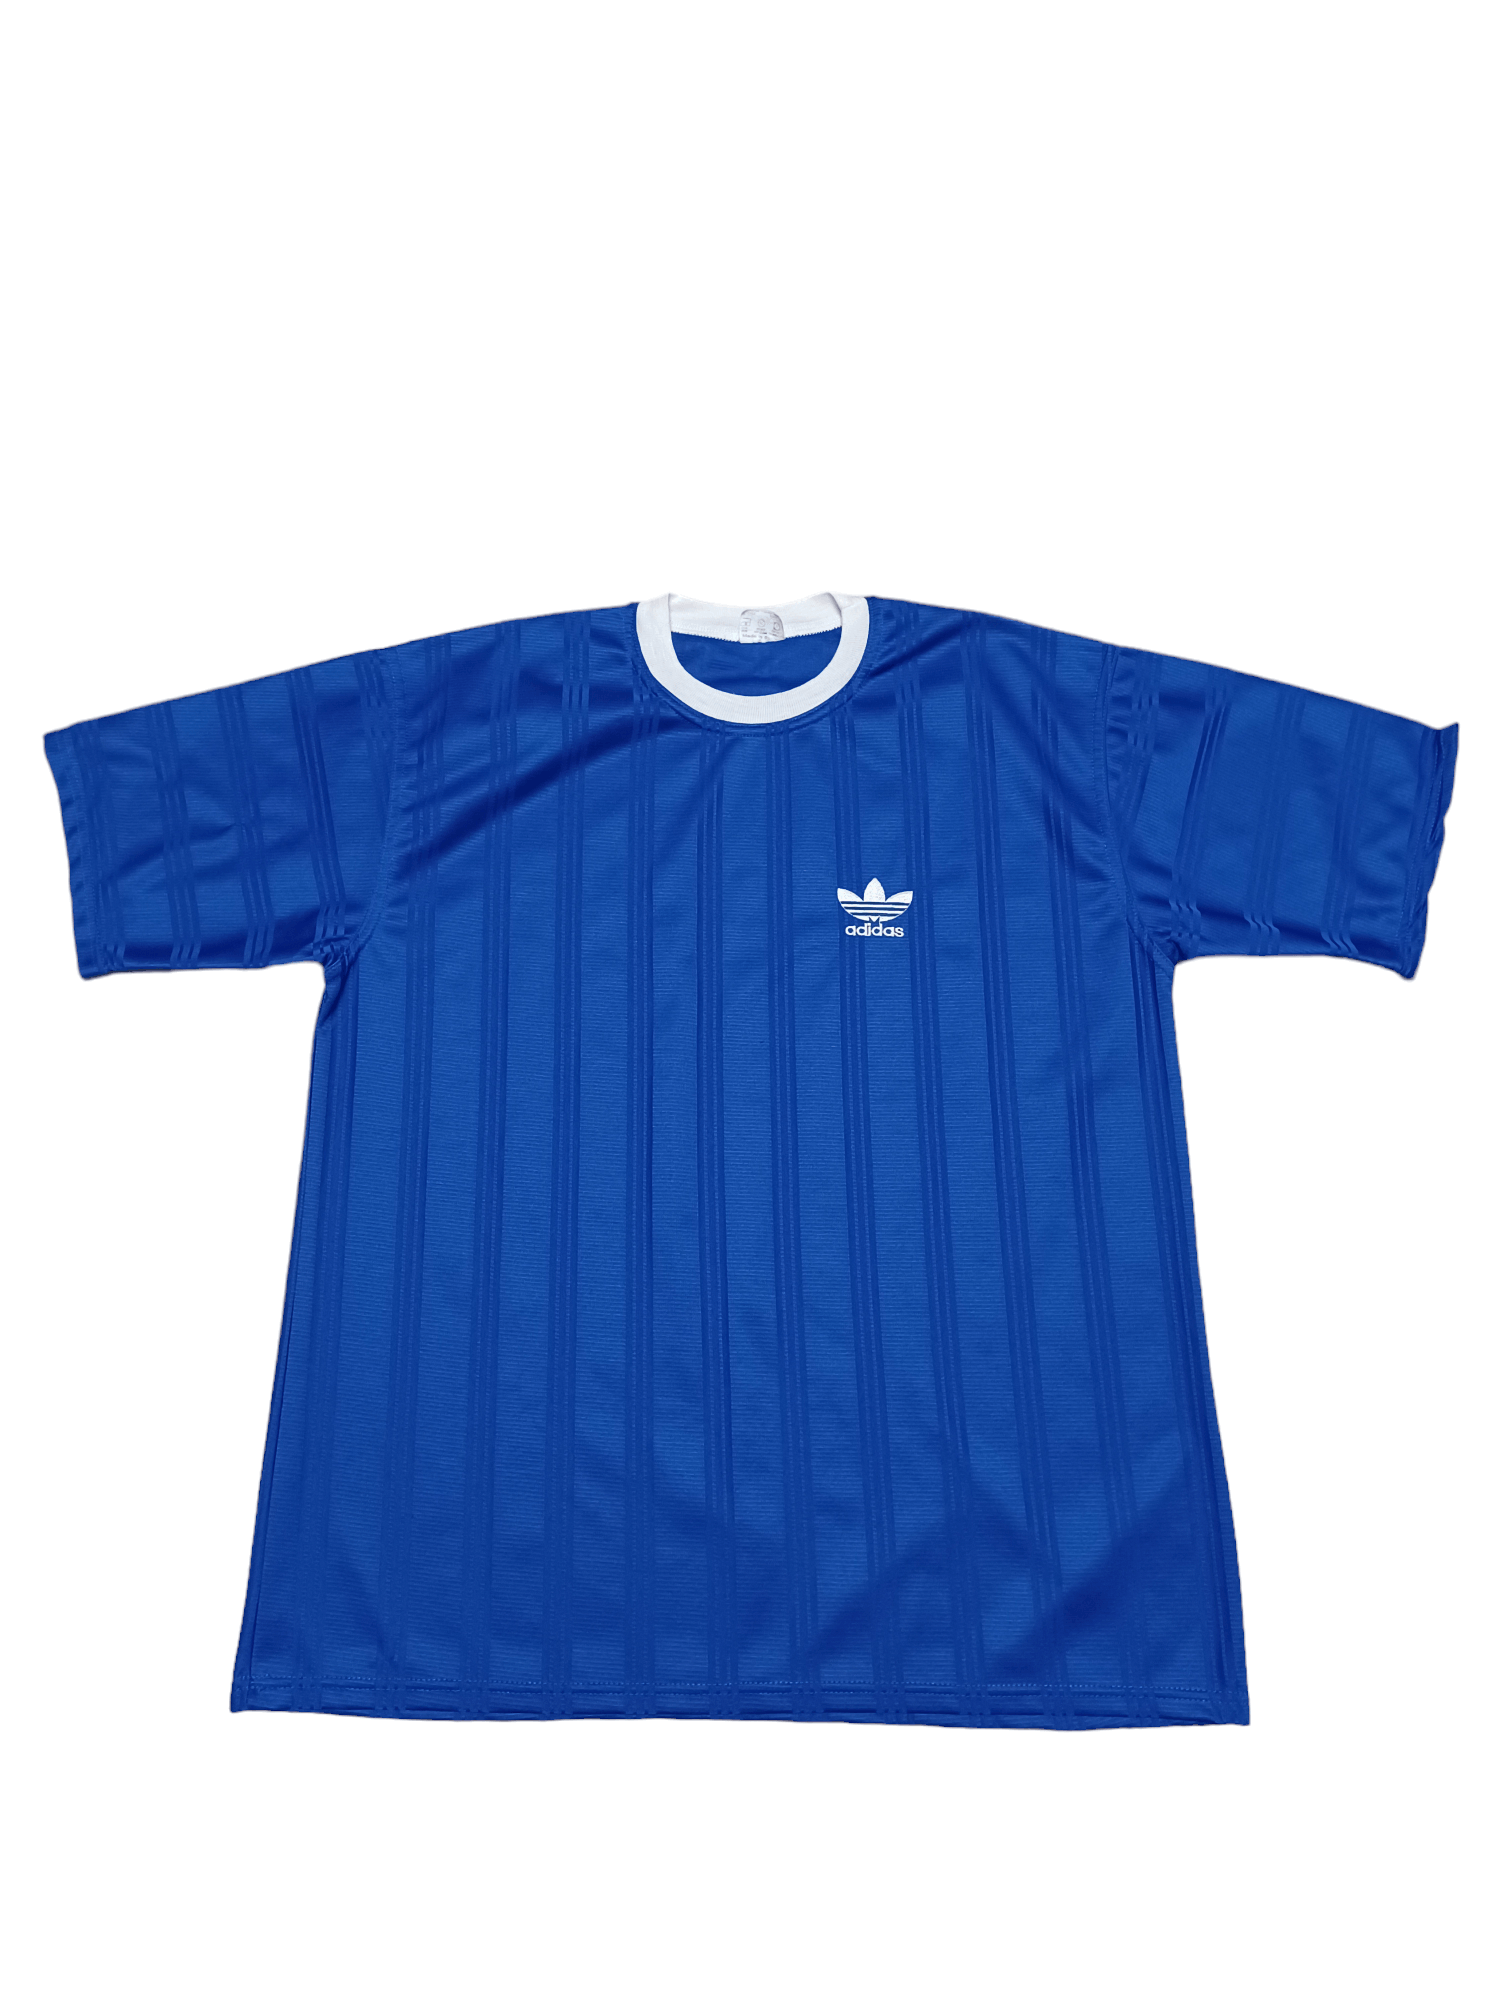 Pre-owned Adidas X Archival Clothing 70's Or Early 80 Very Adidas Made In Spain Soccer Jersey In Blue